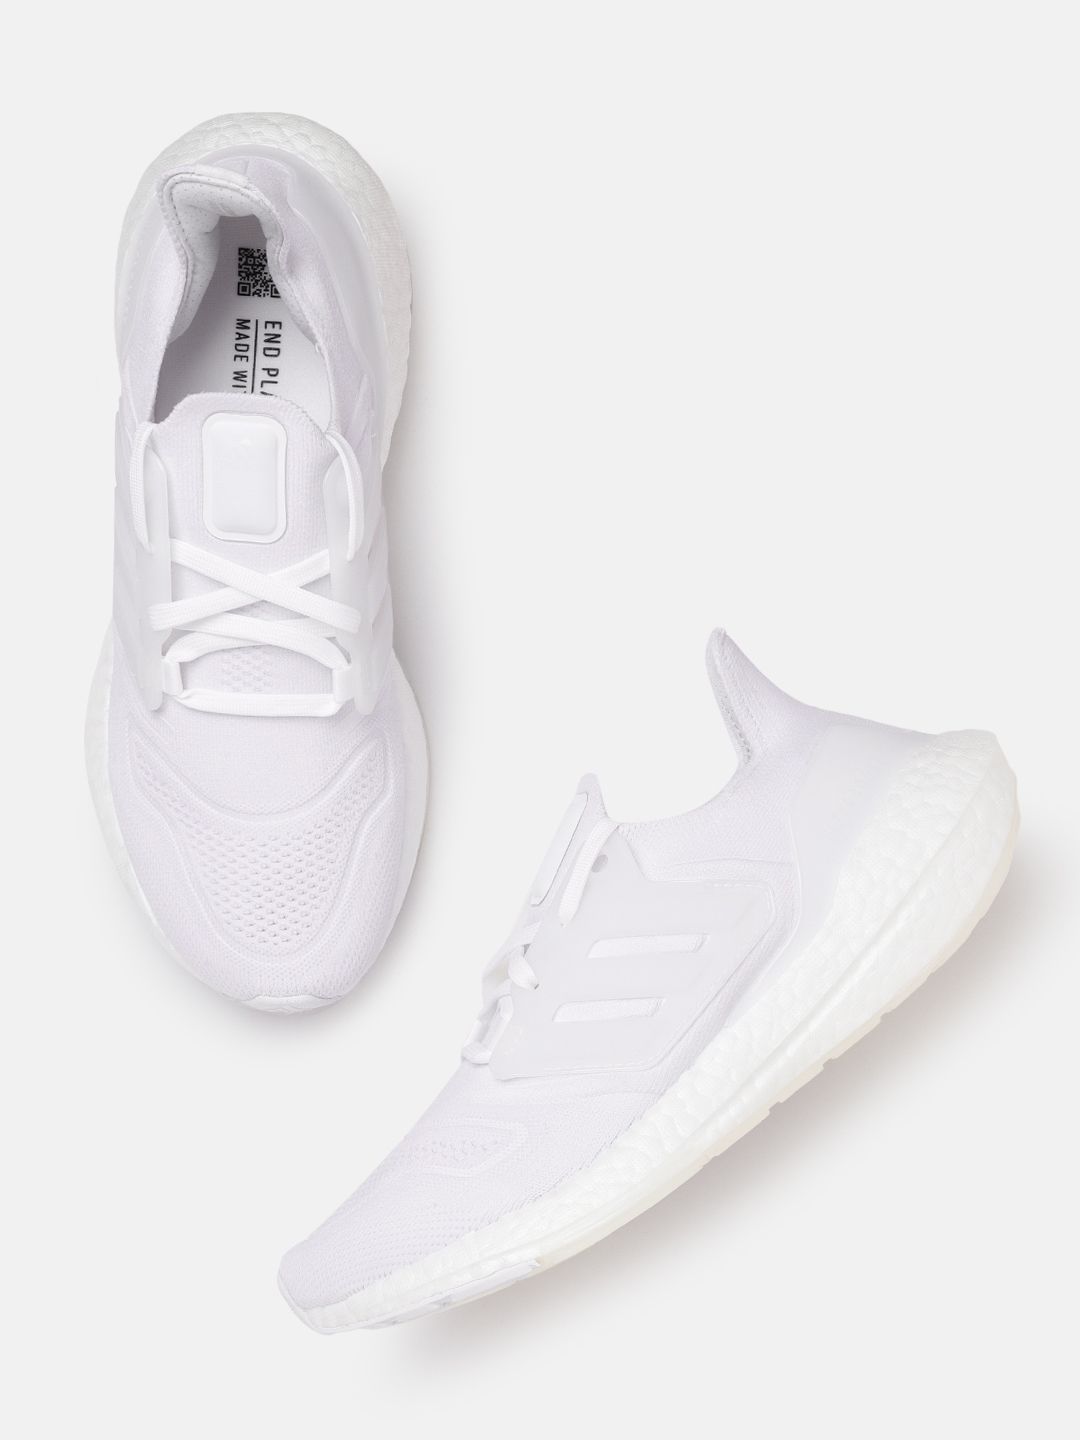 ADIDAS Women White Woven Design Ultraboost 22 Running Shoes Price in India